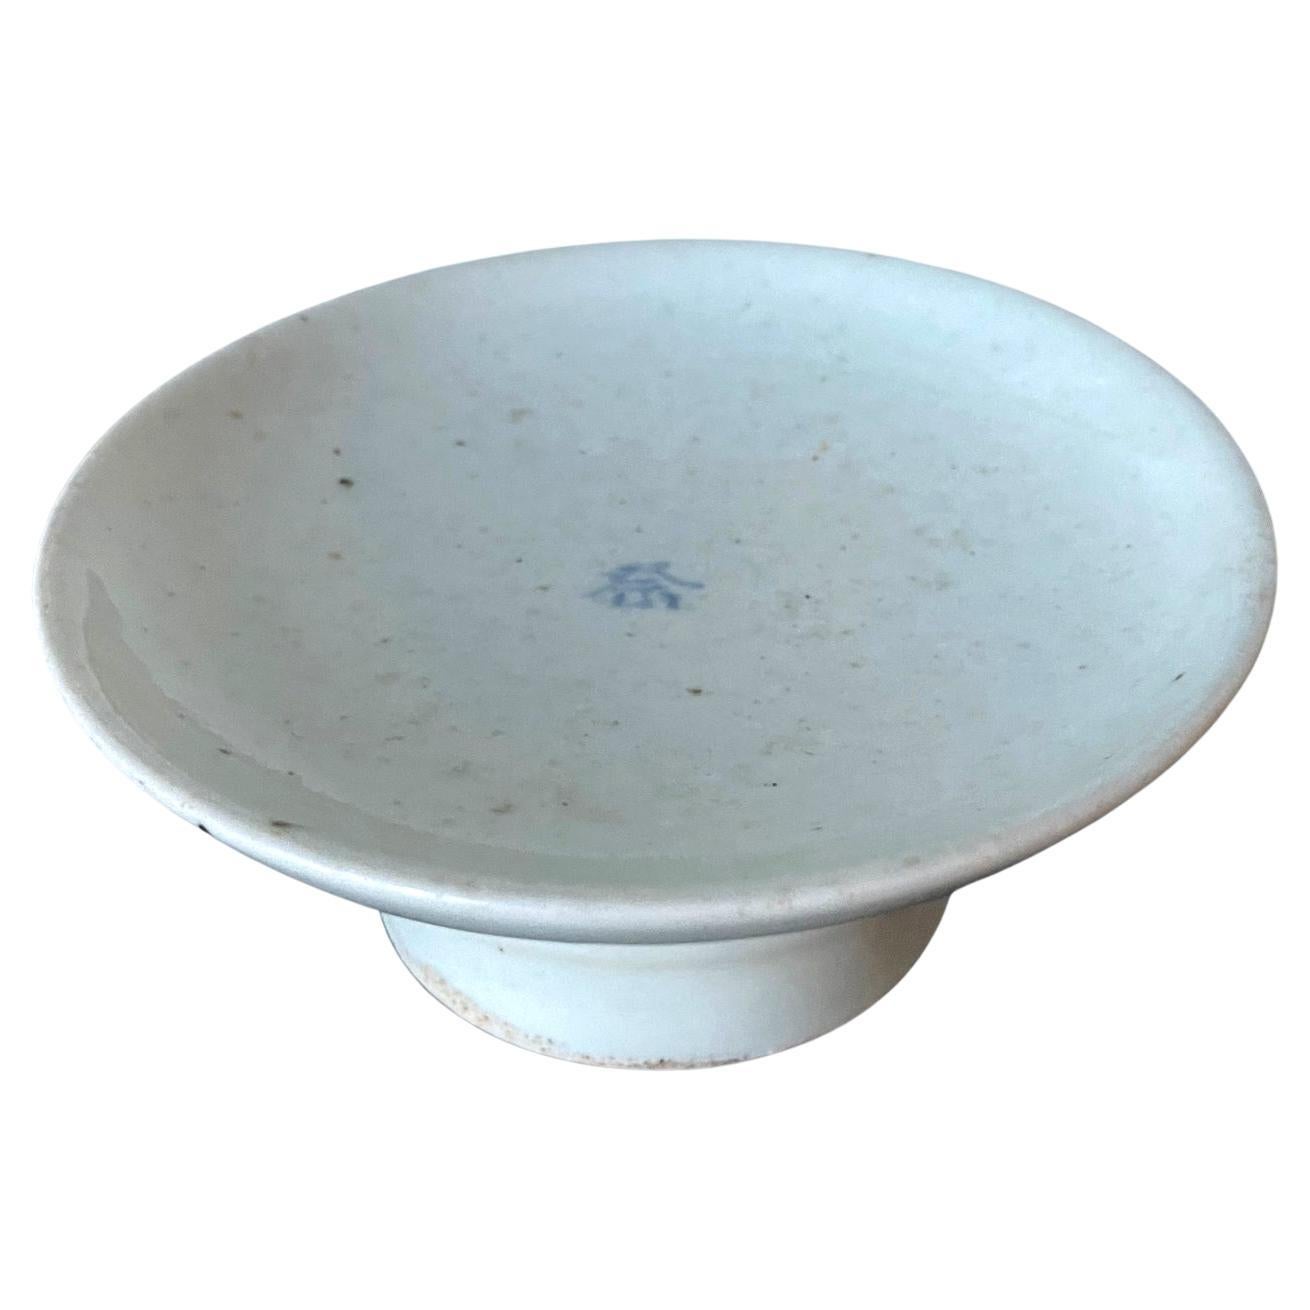 Korean Ceramic Ritual Offering Stemmed Dish with Inscription Joseon Dynasty For Sale